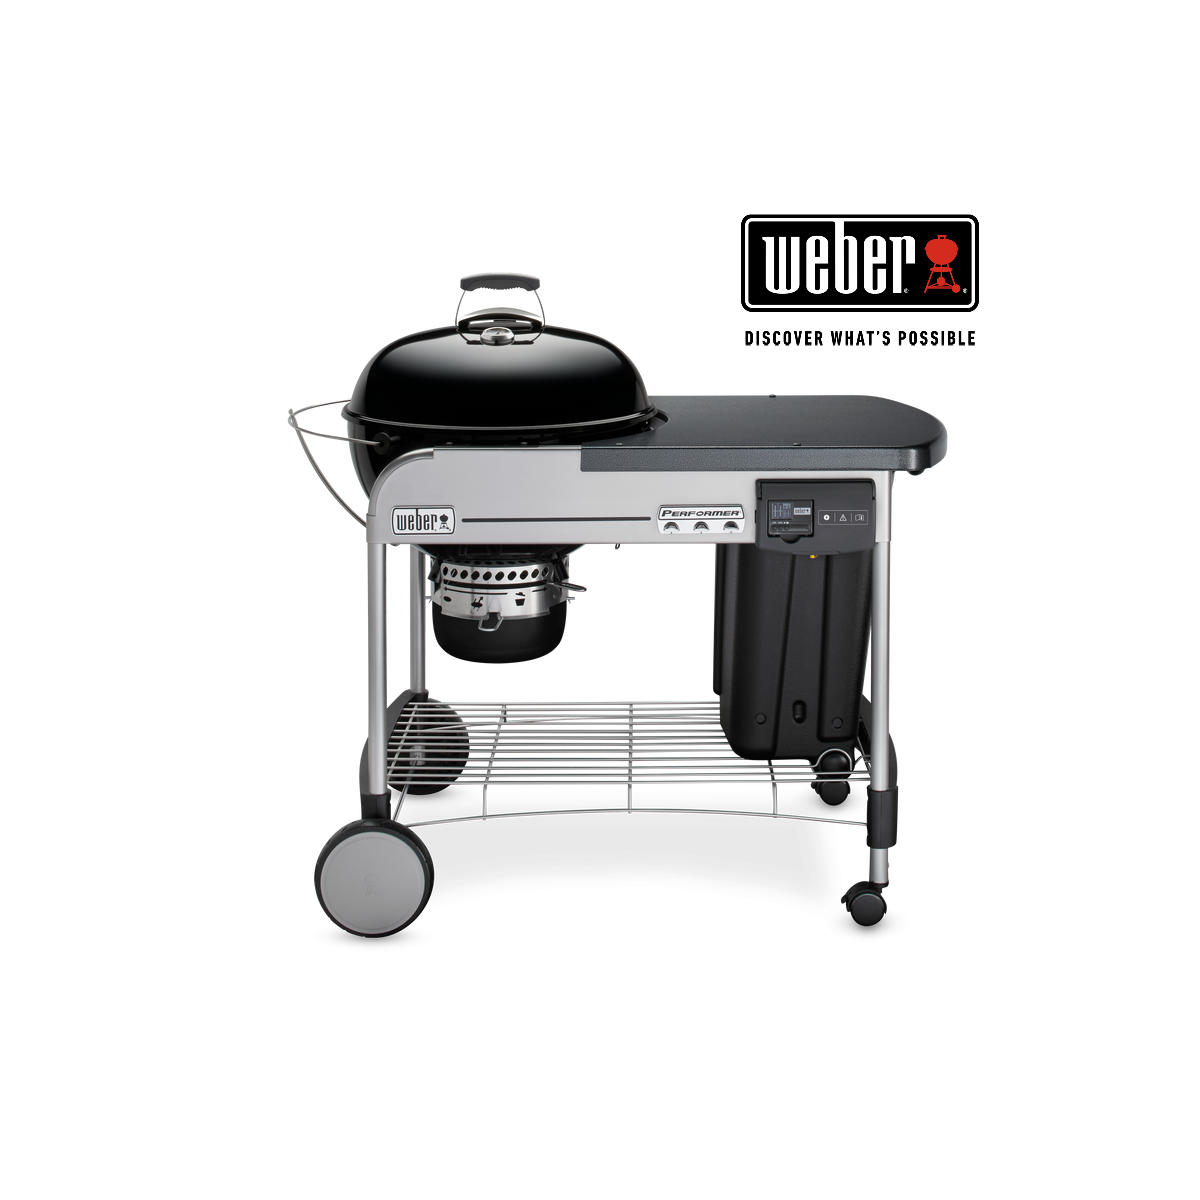 WEBER charcoal grill PERFORMER DELUXE GBS 57cm, 15501004